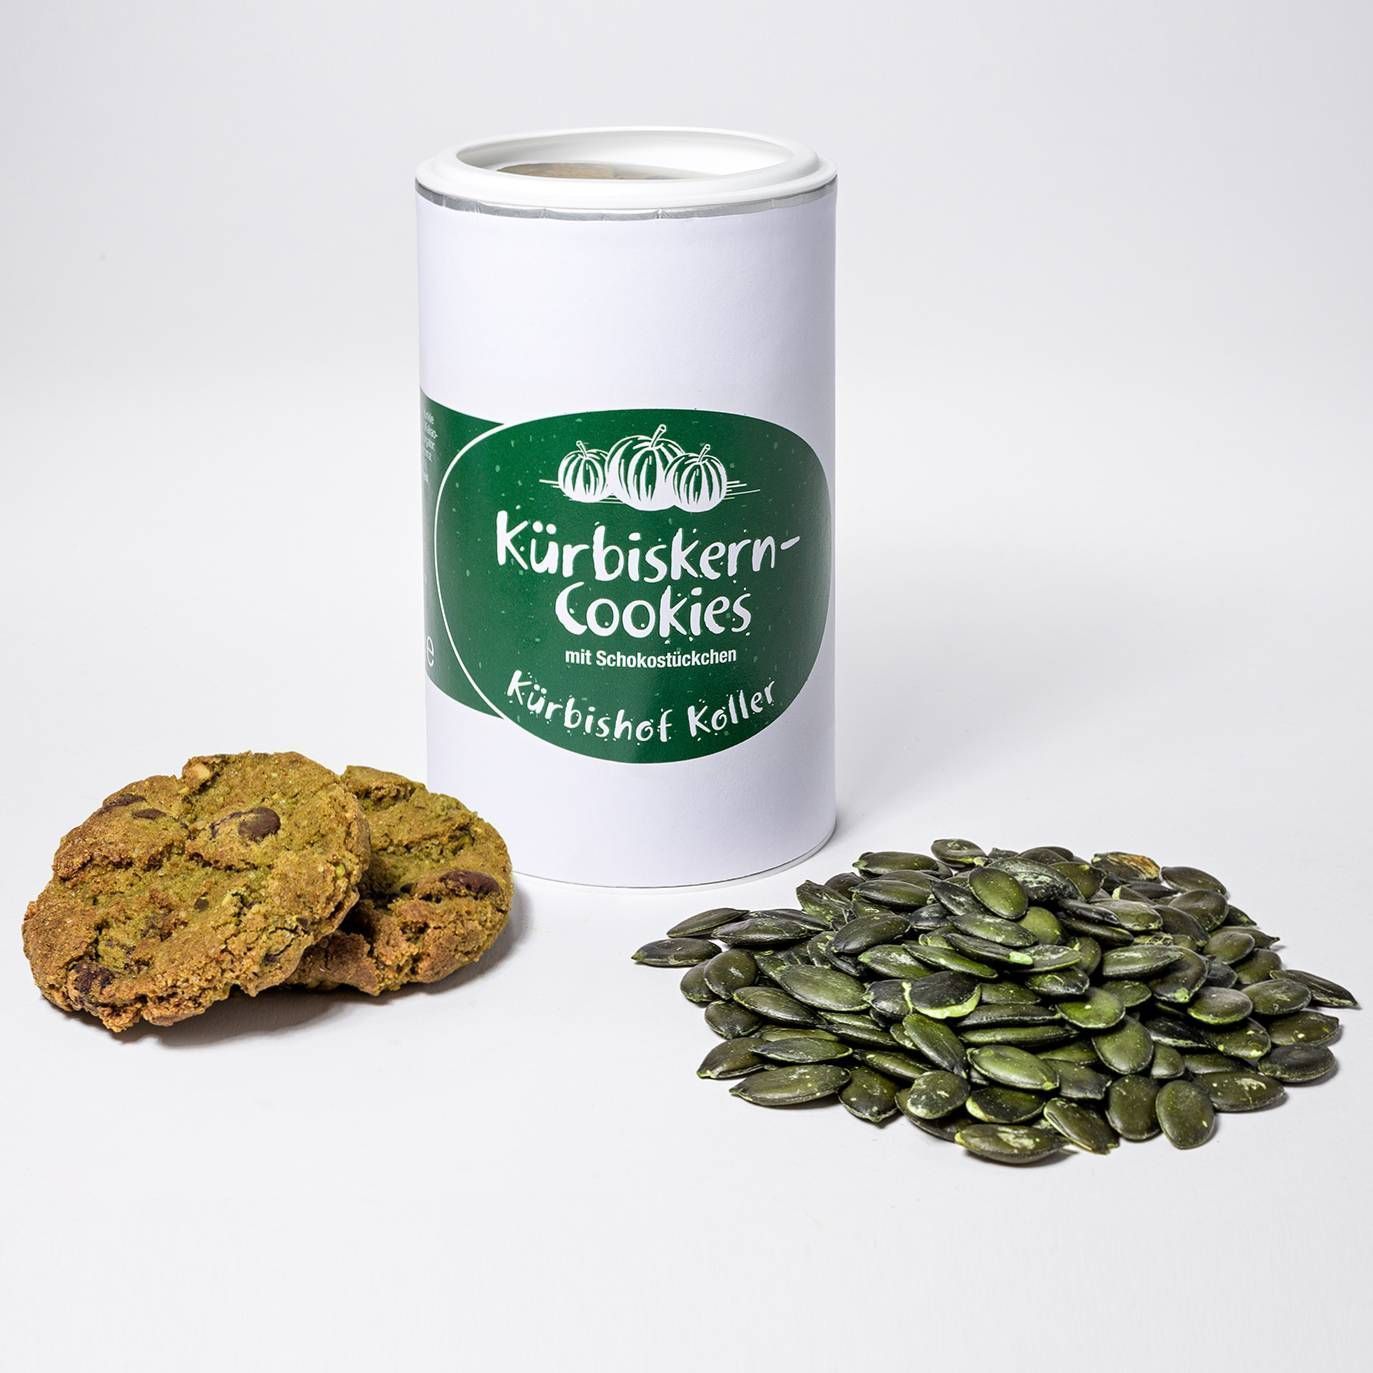 Pumpkin Seed Cookies with Chocolate Chips in Mauritania